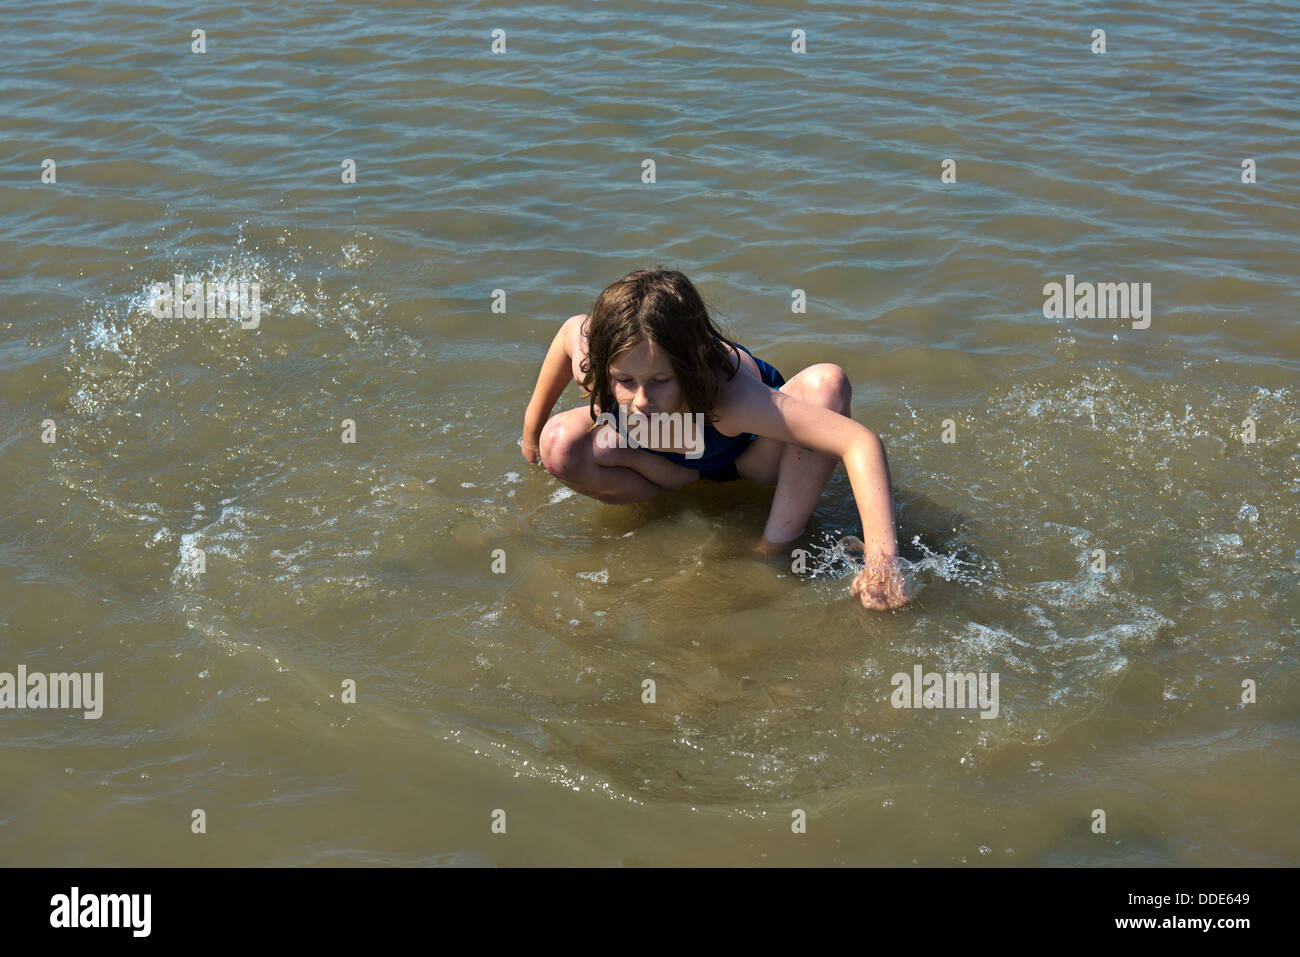 Model released image of a young girl playing in the waves at Southend on Sea, Essex. Stock Photo